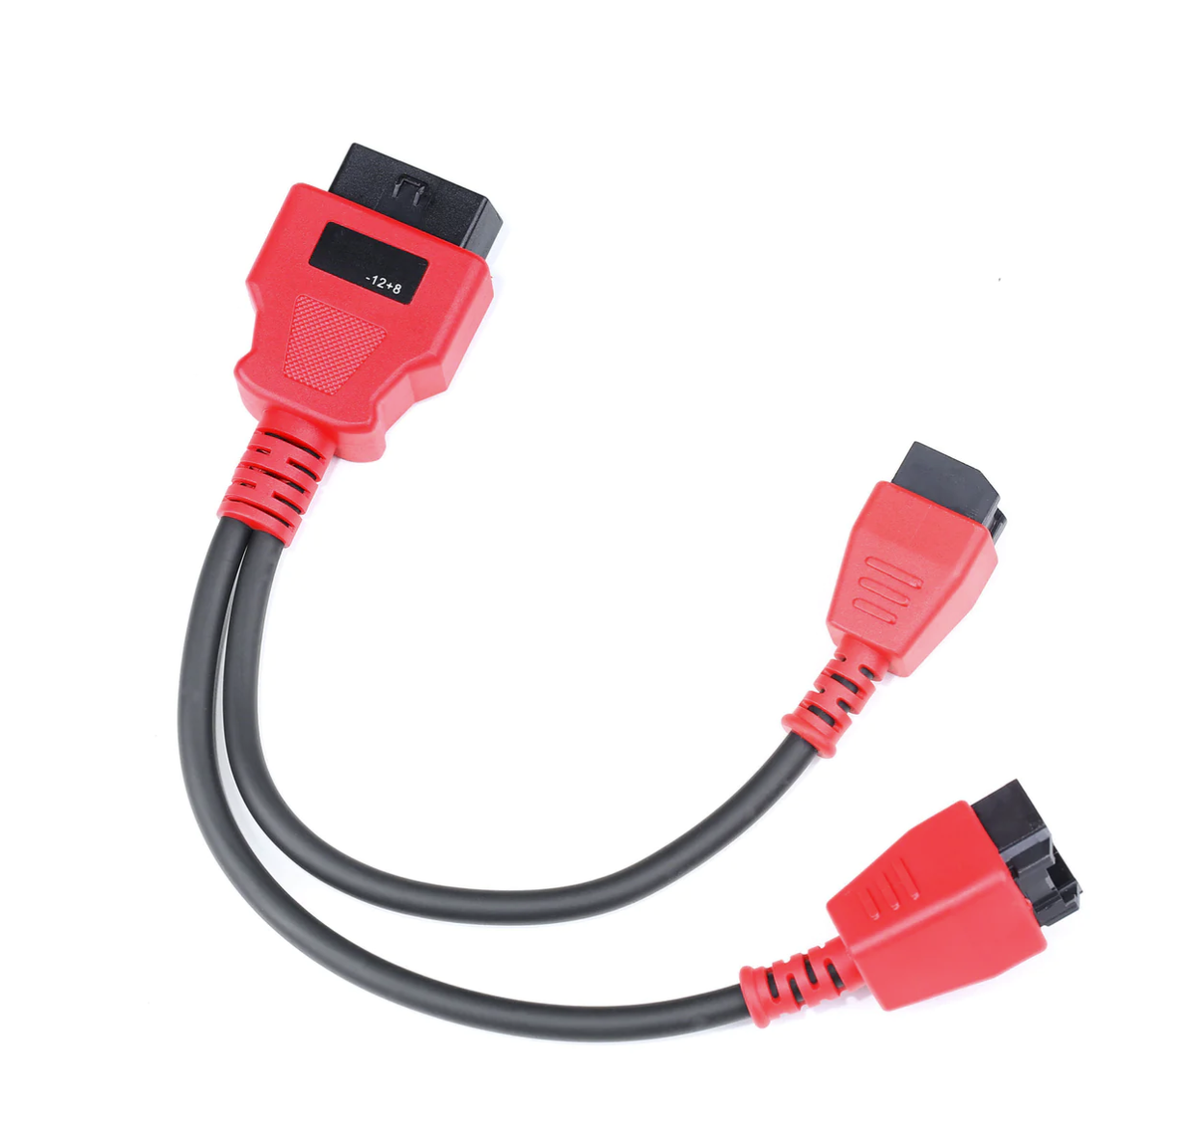 Autel Original OBD2 Adapter for Chrysler 12+8 Programming Cable Connector, Bypass Gateway Protocol Cable, Work Scanner Autel